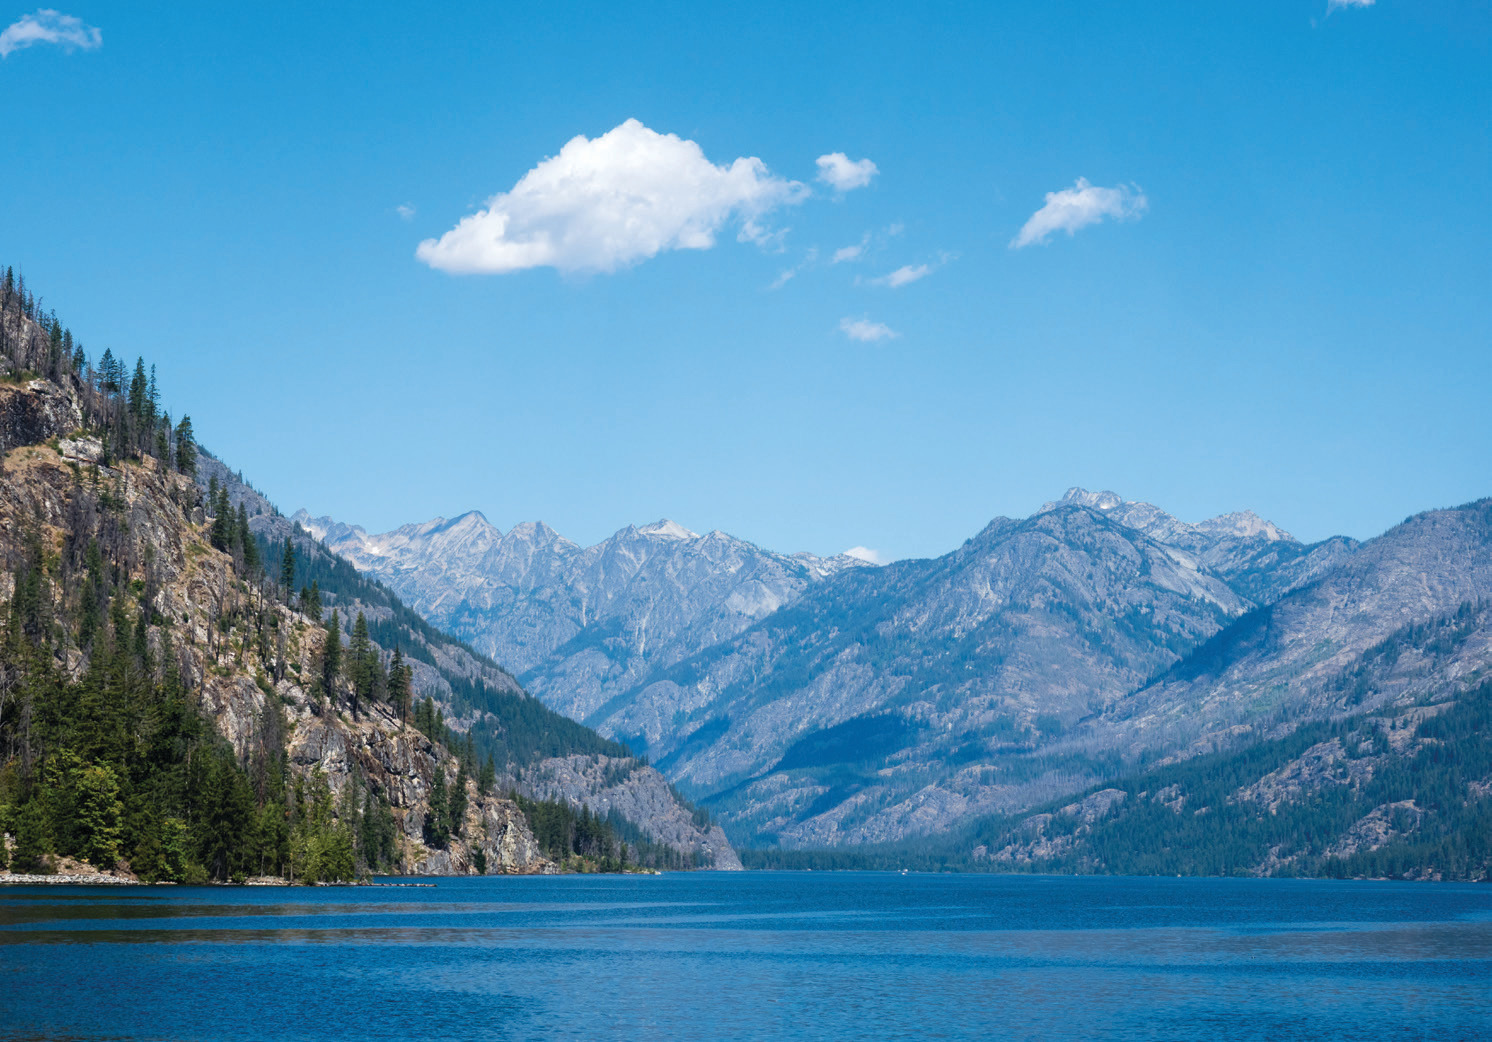 Lake Chelan is easy on the eyes and hard to leave behind.